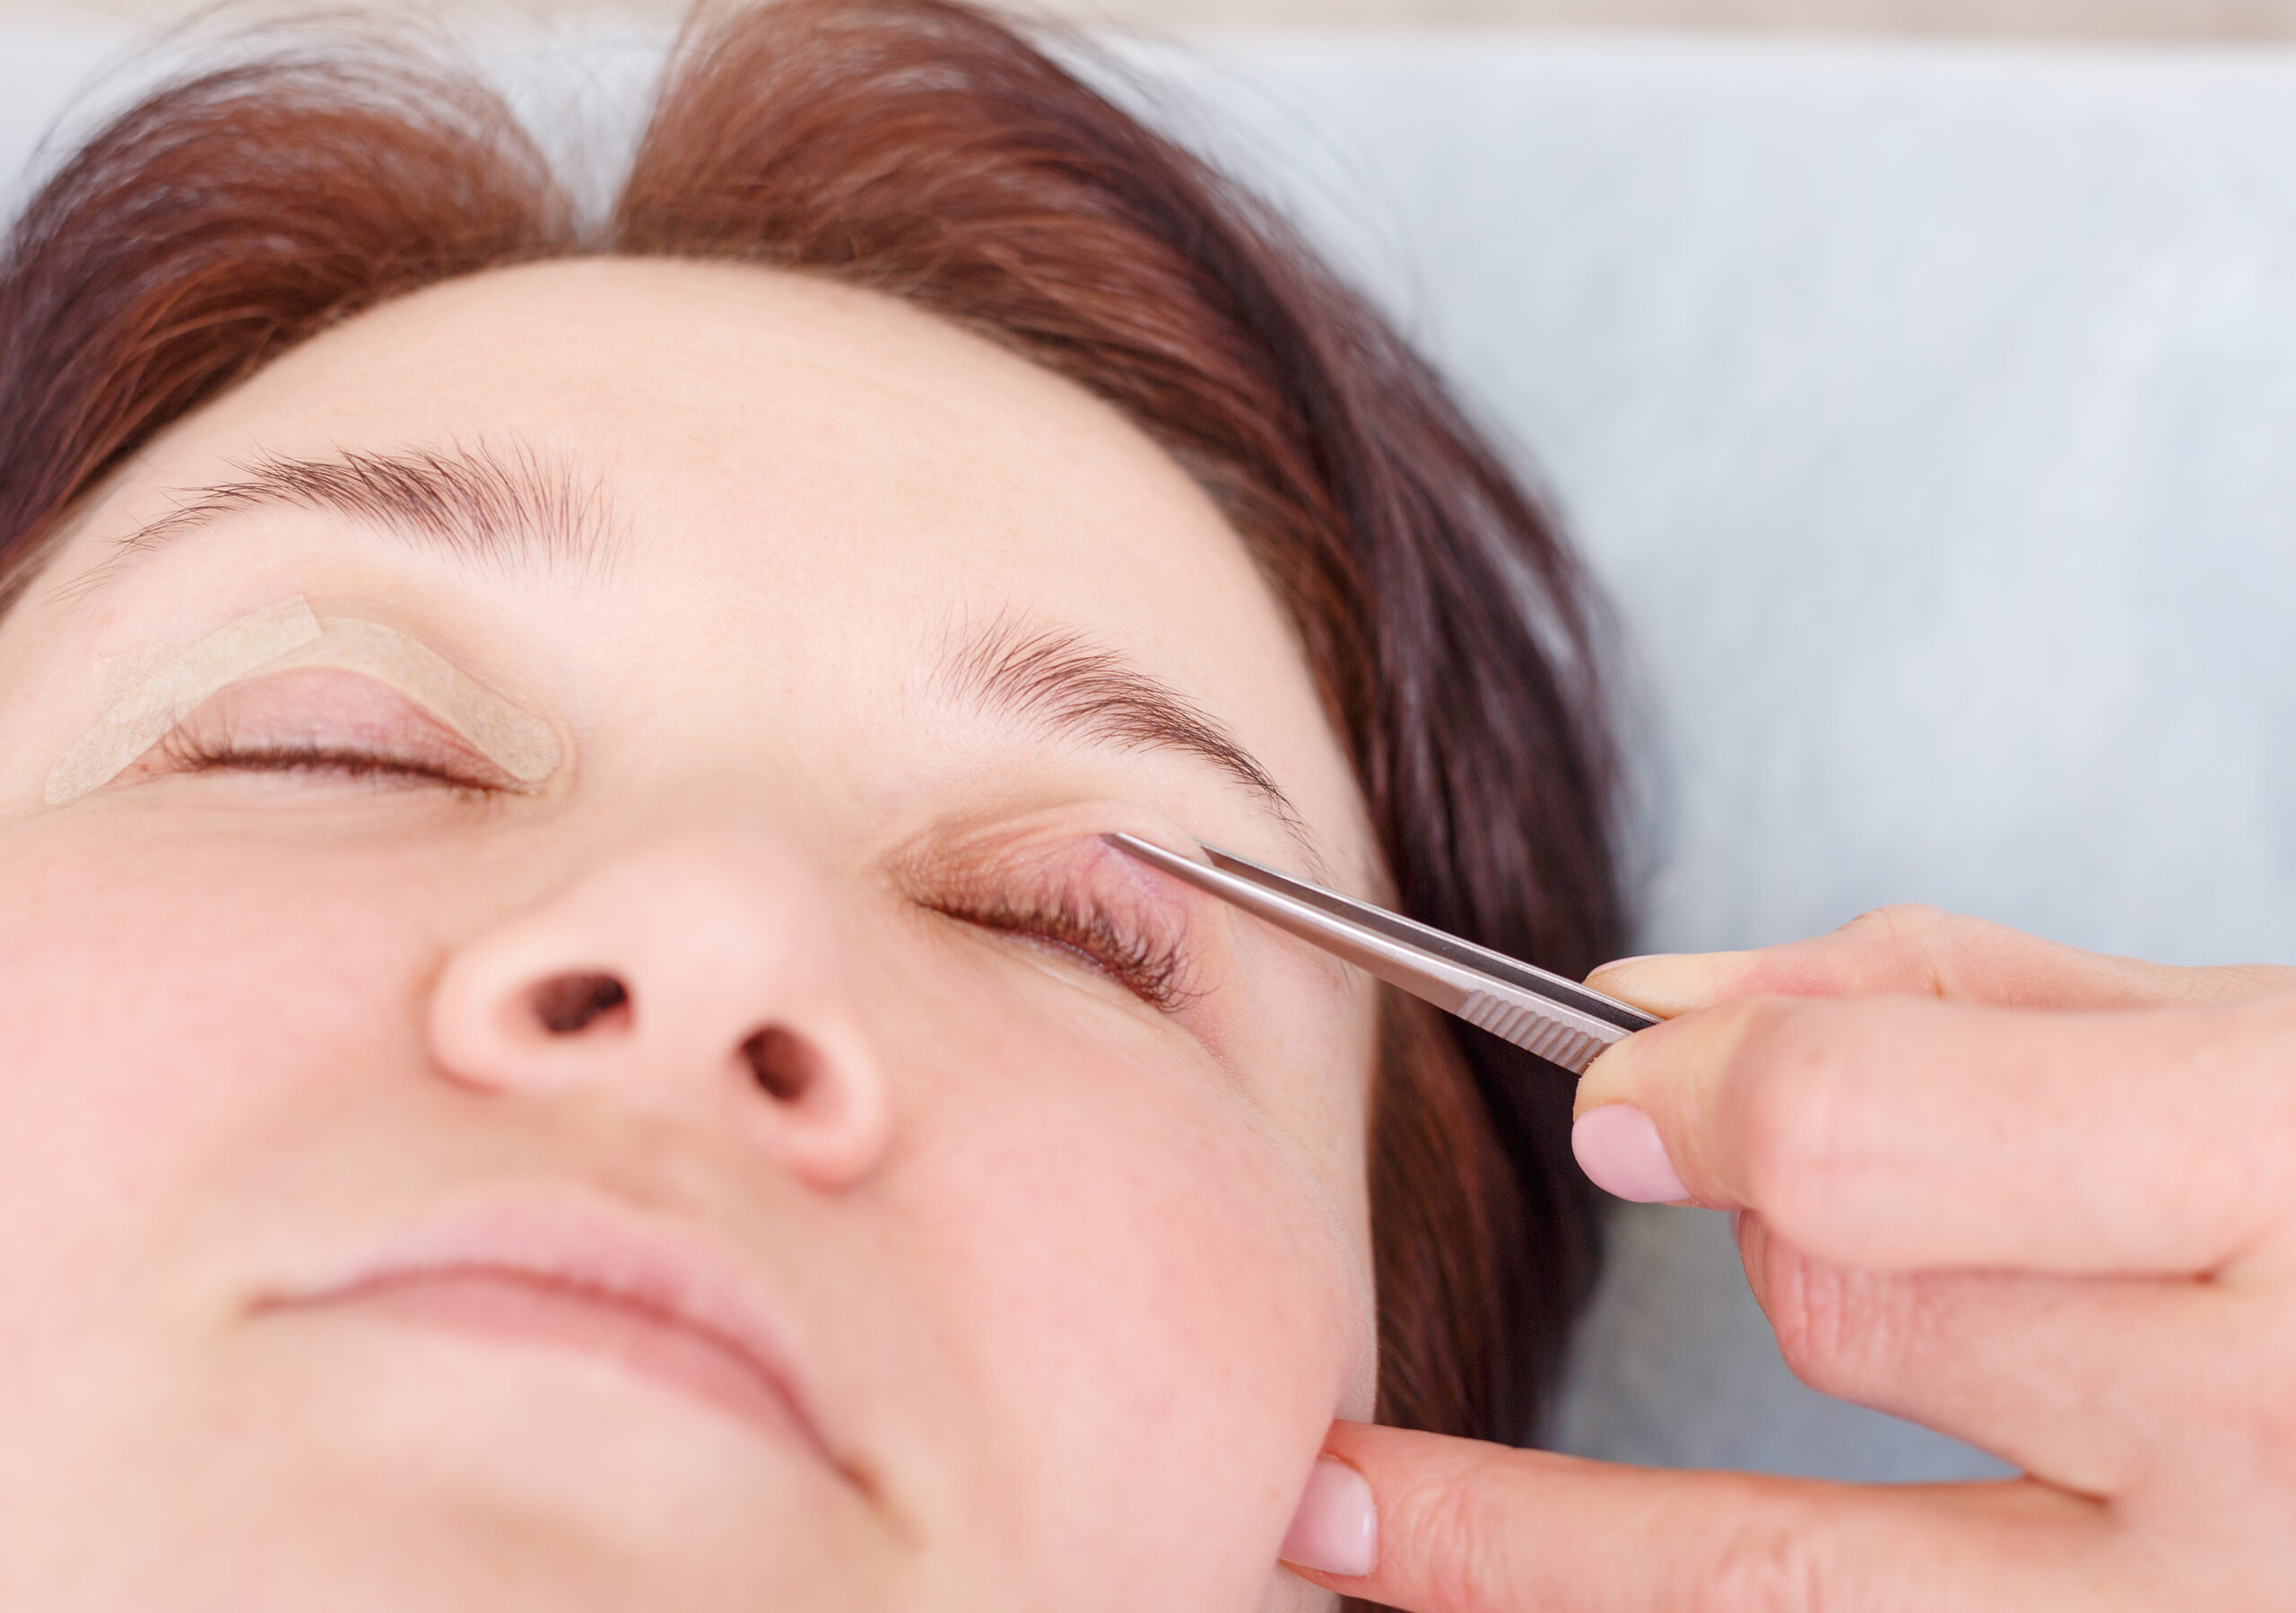 Female surgeon applies a bandage to the female patient's eyelids after a blepharoplasty operation. Close up portrait